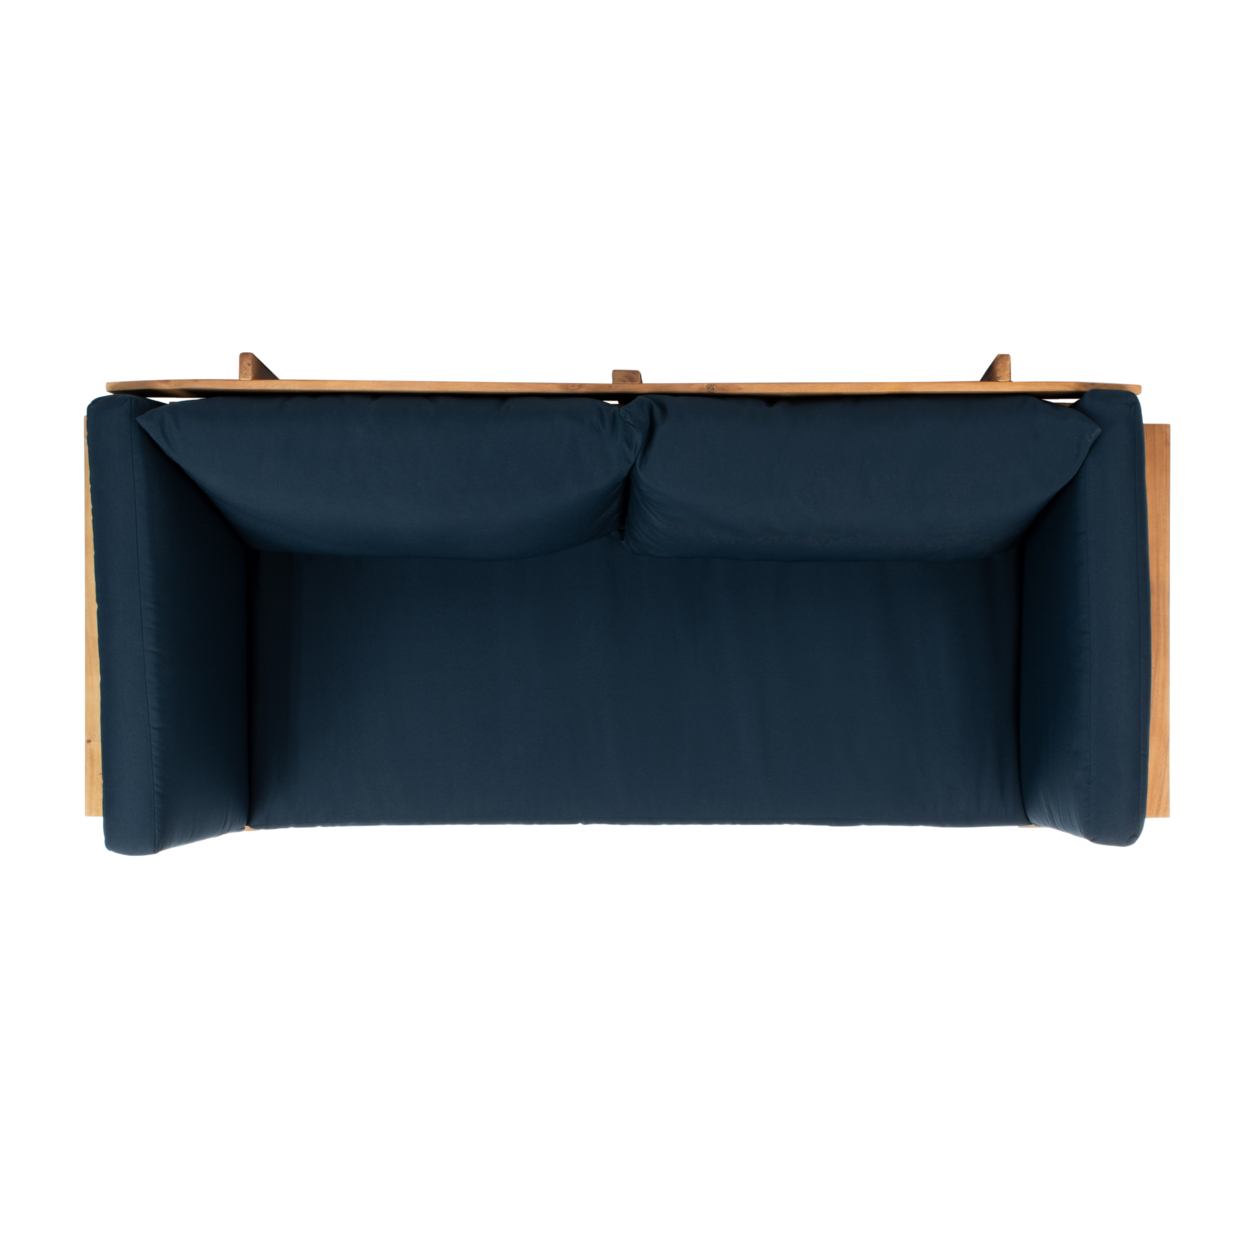 SAFAVIEH Outdoor Collection Tandra Modern Contemporary Daybed Natural/Navy